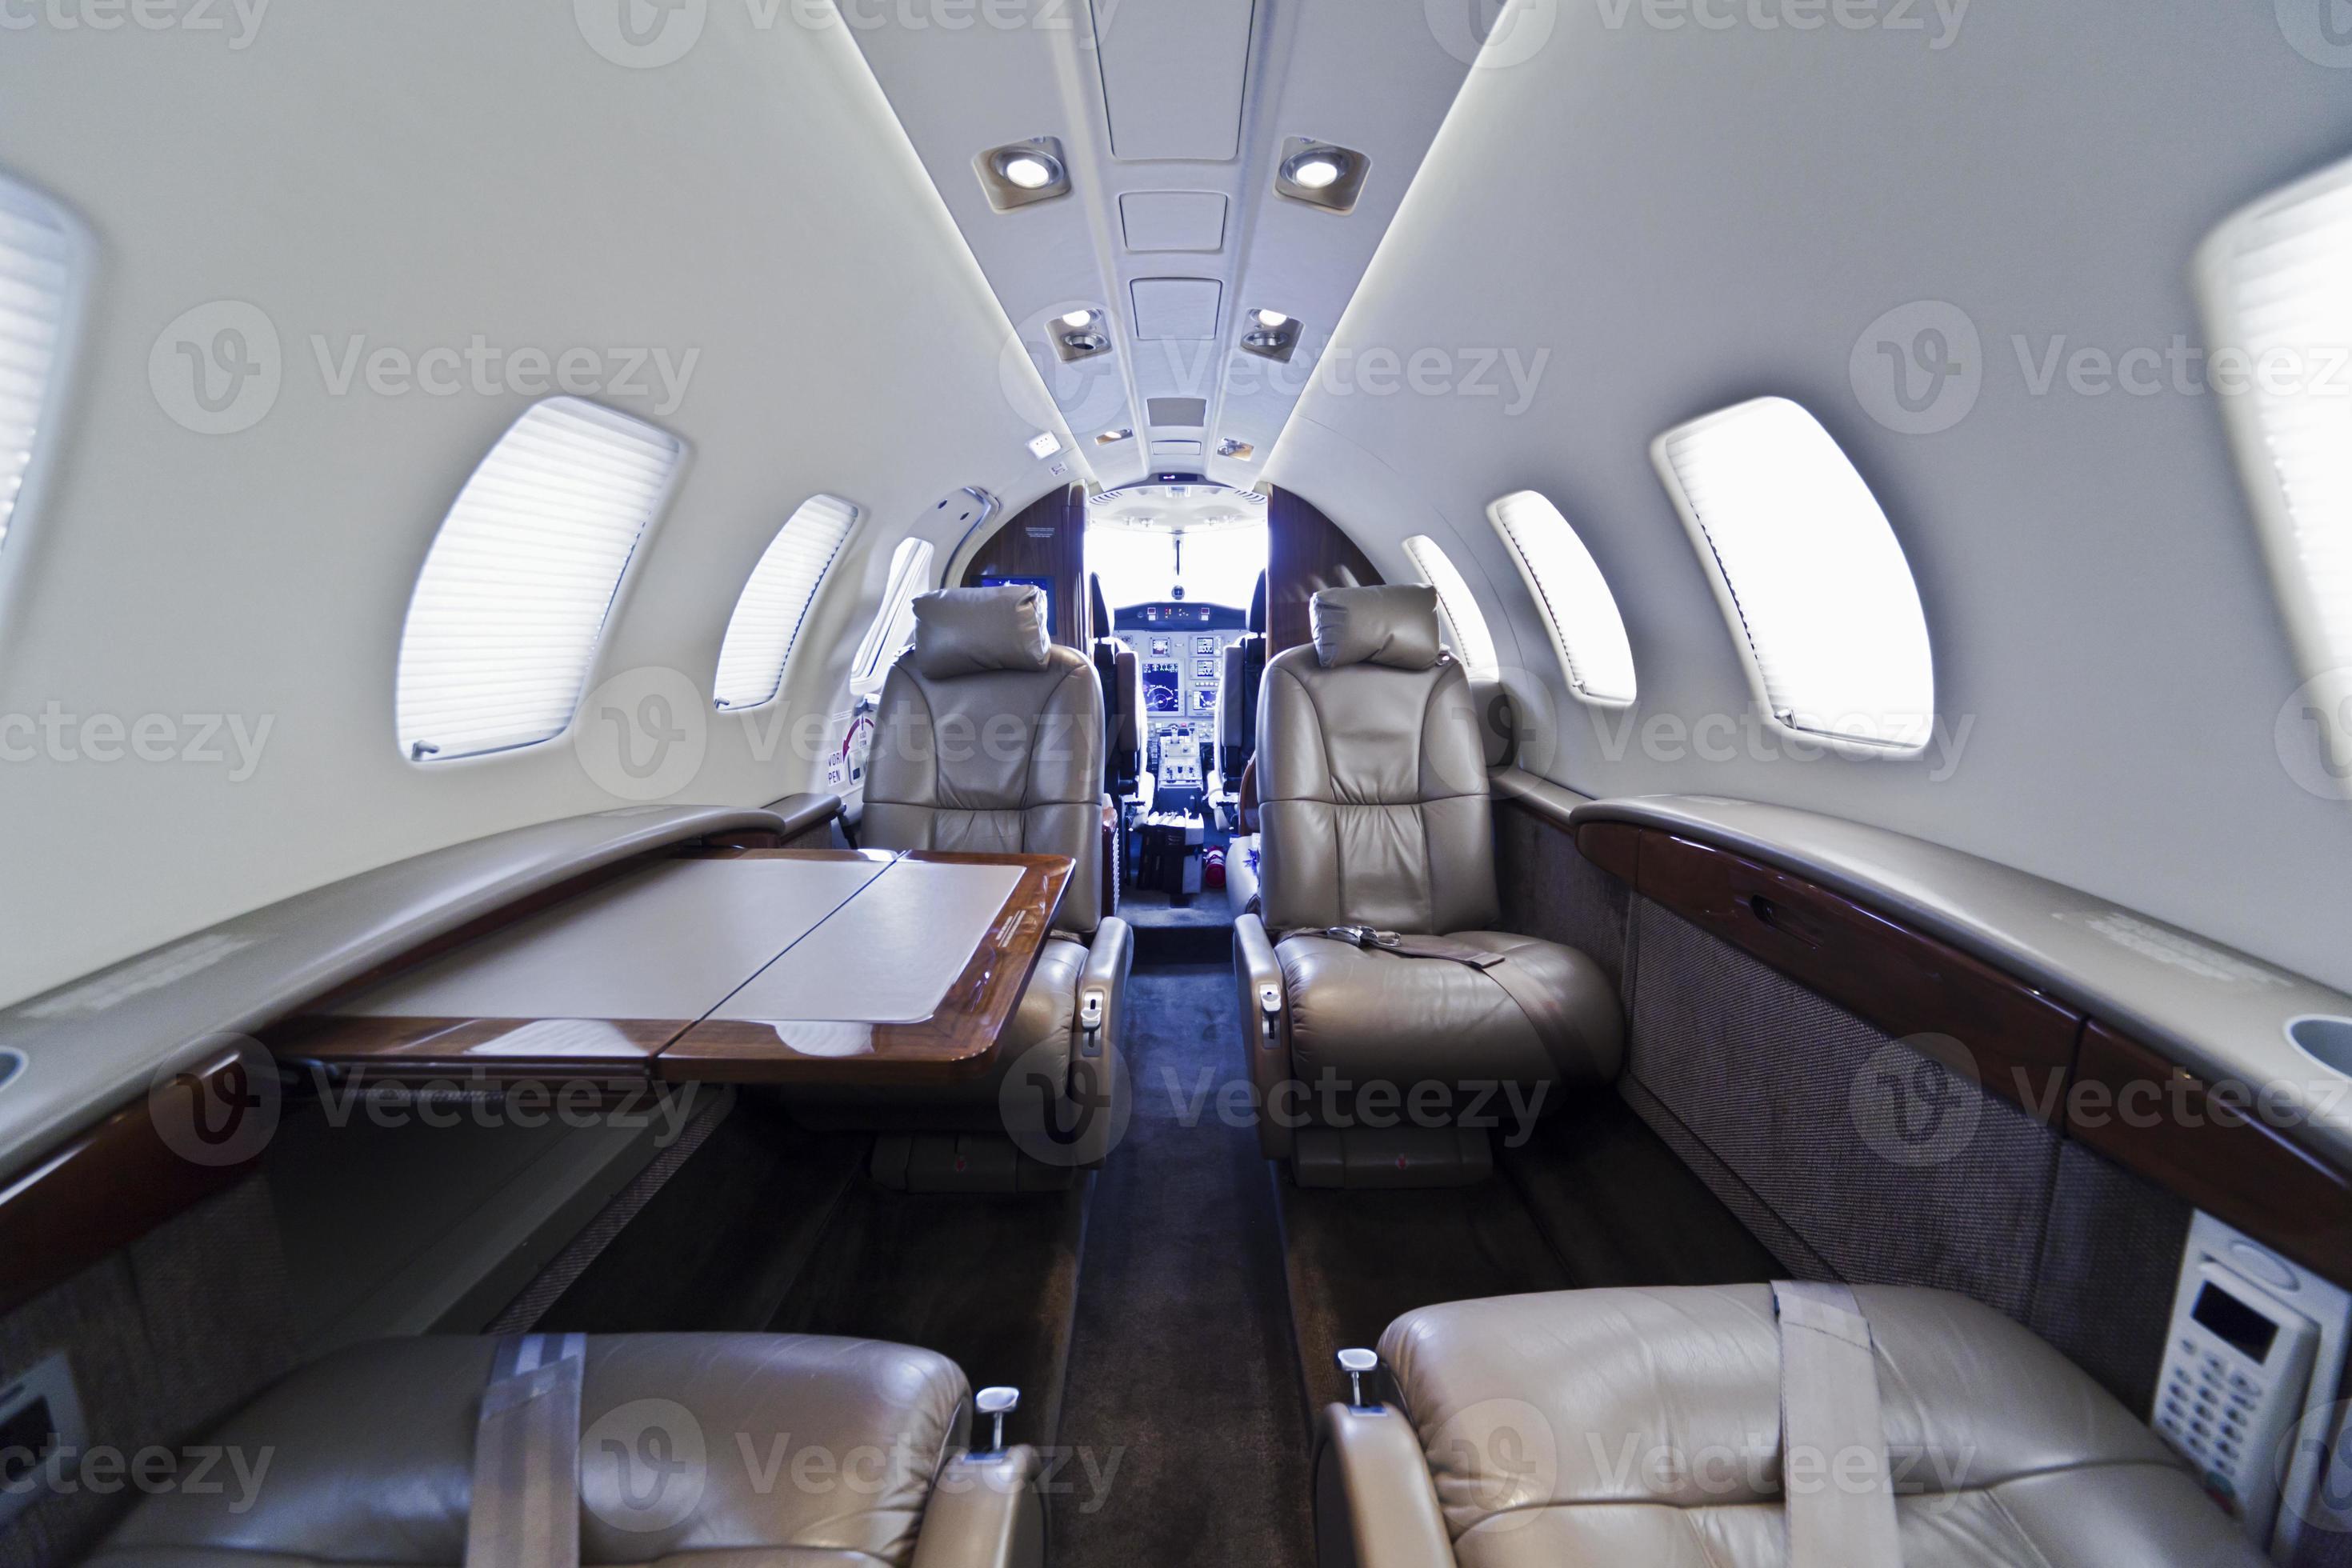 7 Facts About Flying on Private Jets - Republic Jet Center